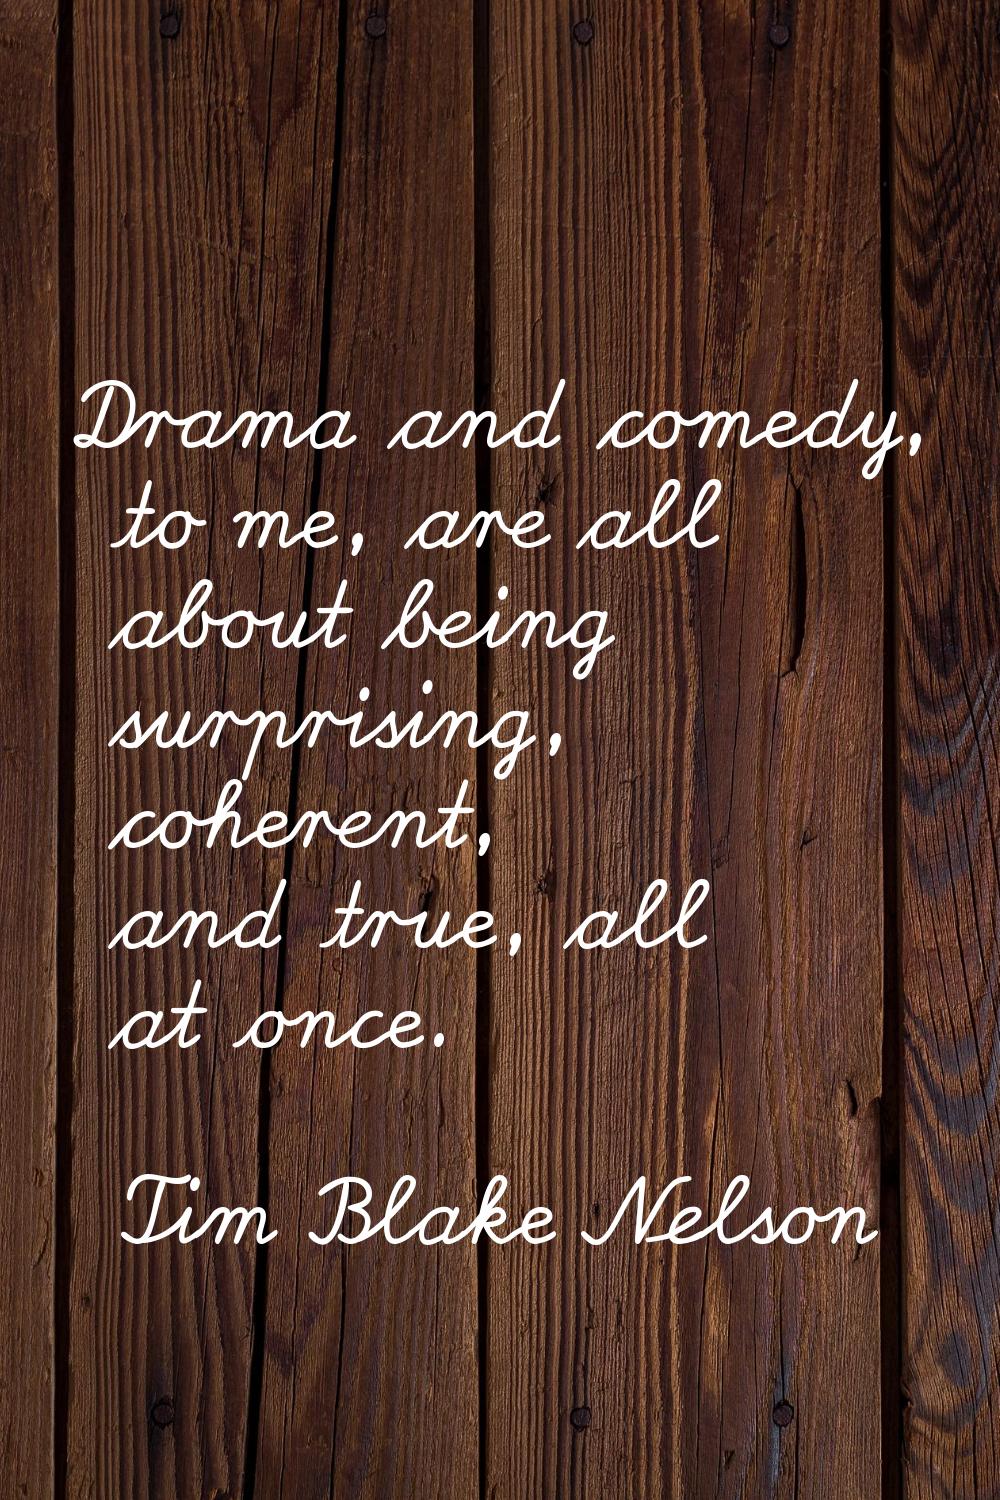 Drama and comedy, to me, are all about being surprising, coherent, and true, all at once.